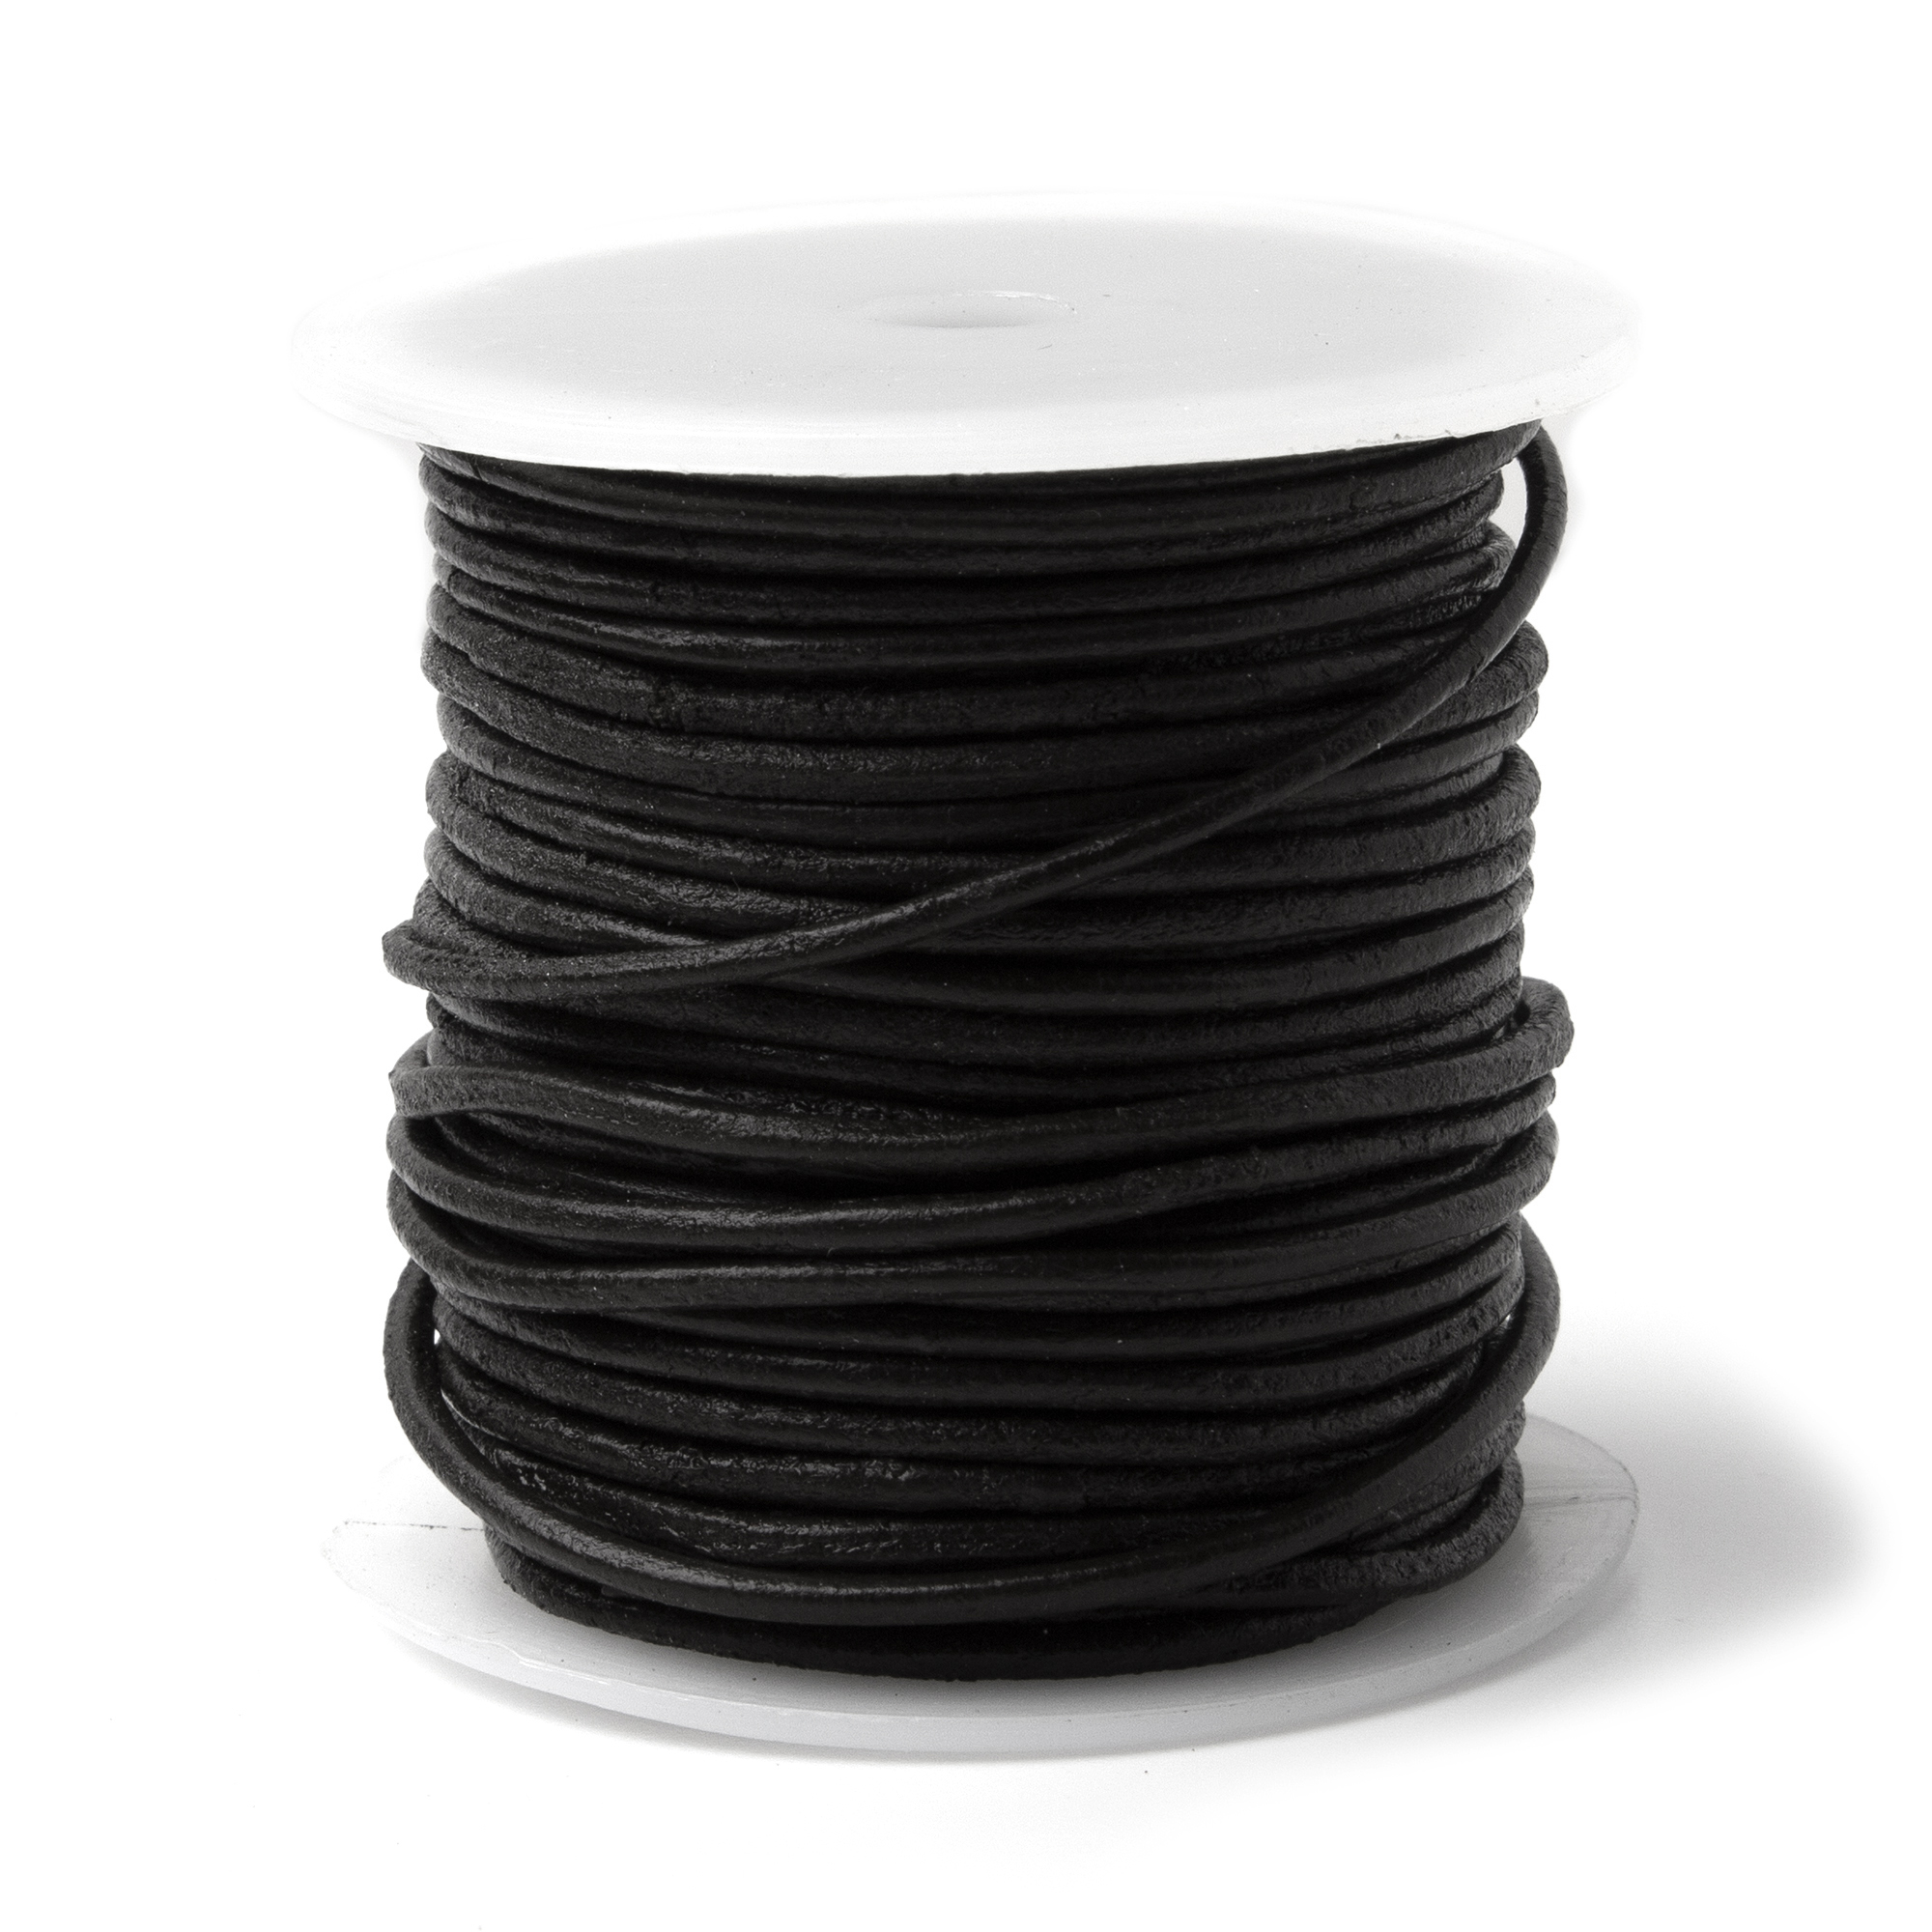 Cousin DIY Black Leather Jewelry and Beading Cord Spool, 25 yd. 